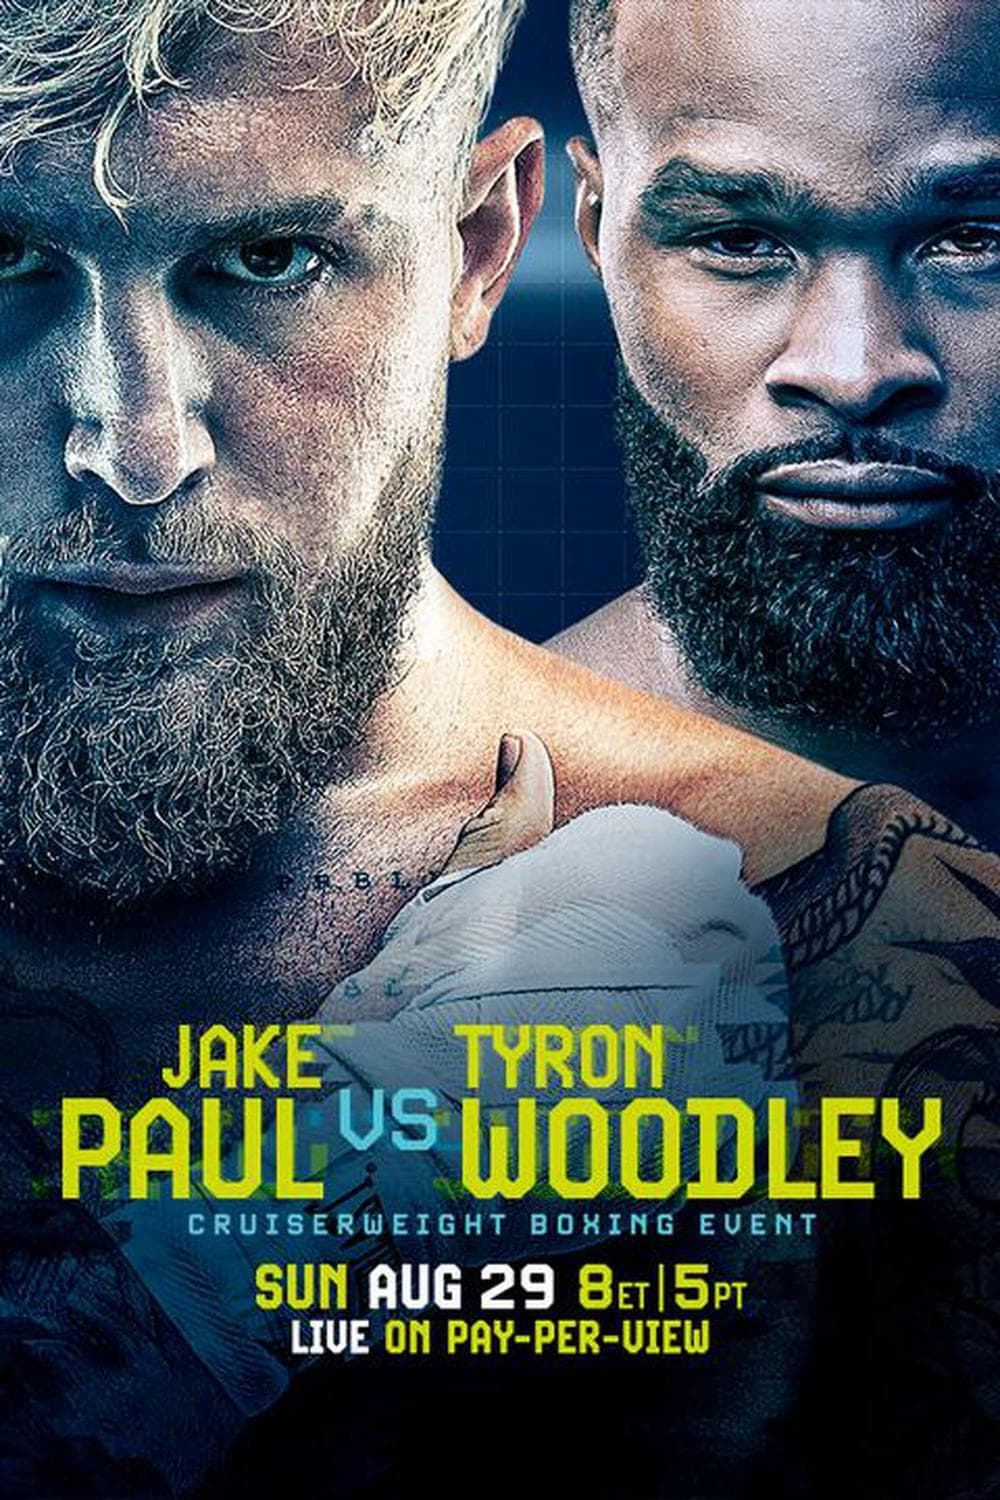 Jake Paul Vs Tyron Woodley 2021 Movie Where To Watch Streaming Online Plot